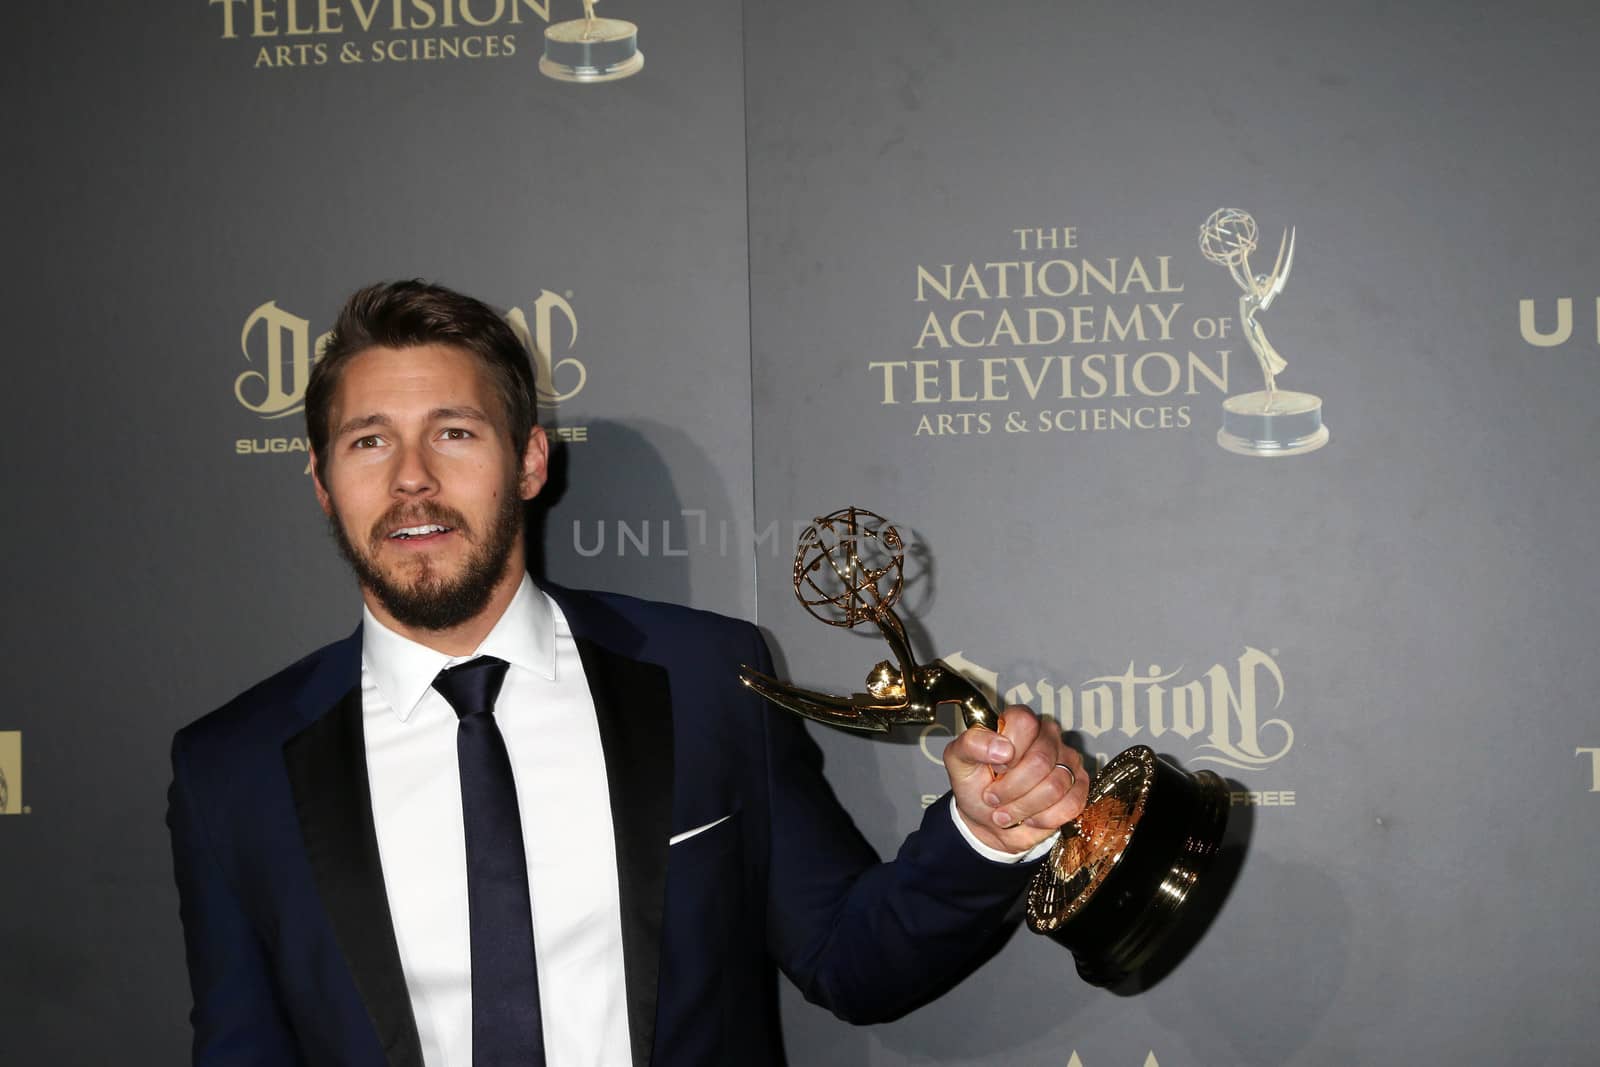 Scott Clifton, Outstanding Lead Actor in a Drama Series, The Bold and the Beautiful
at the 44th Daytime Emmy Awards - Press Room, Pasadena Civic Auditorium, Pasadena, CA 04-30-17/ImageCollect by ImageCollect